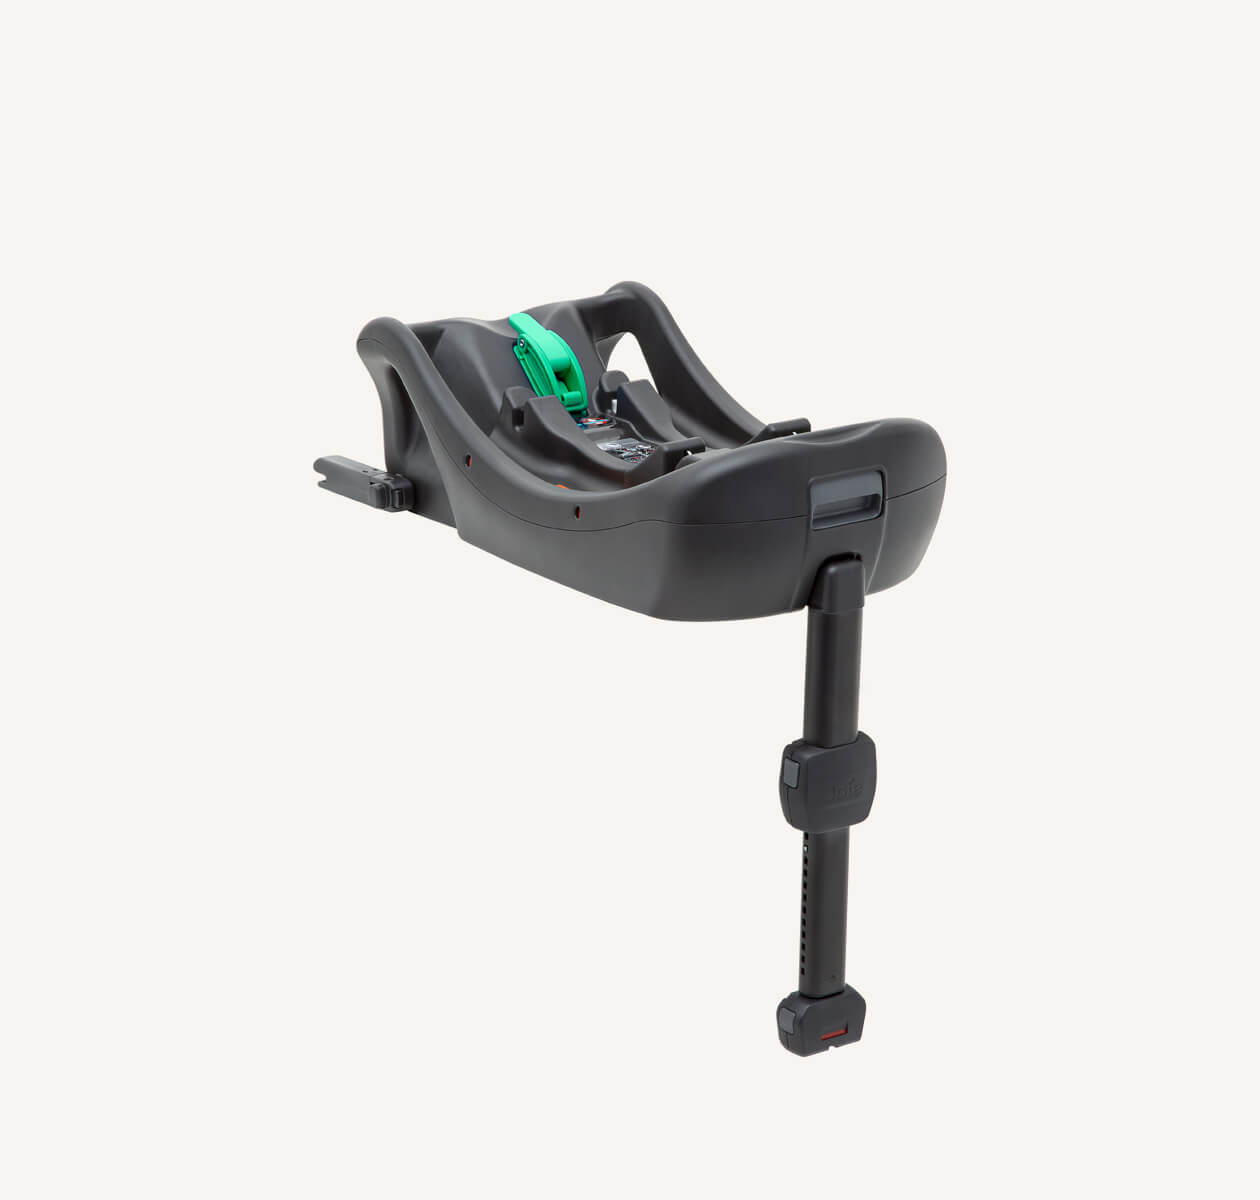  Joie i-base 2 car seat base from a right angle with rebound bar extended. 